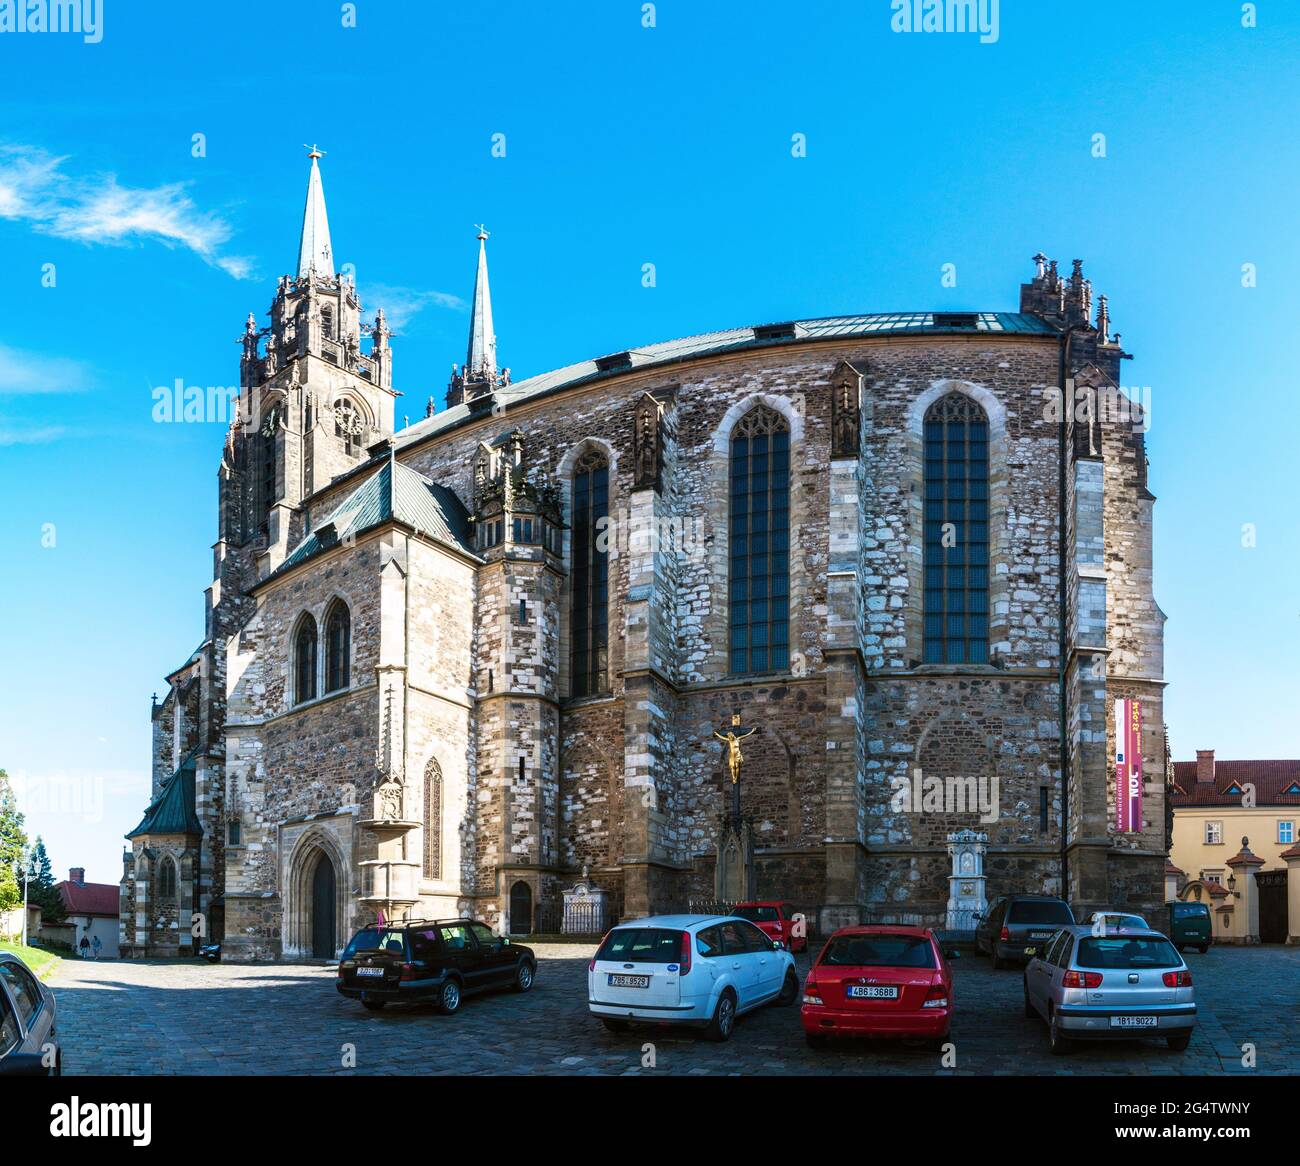 BRNO, CZECH REPUBLIC - MAY 8: Cathedral of the St, Peter and Paul  in Brno, Czech Republic on May 8, 2014. Brno is the second largest city in the Czec Stock Photo